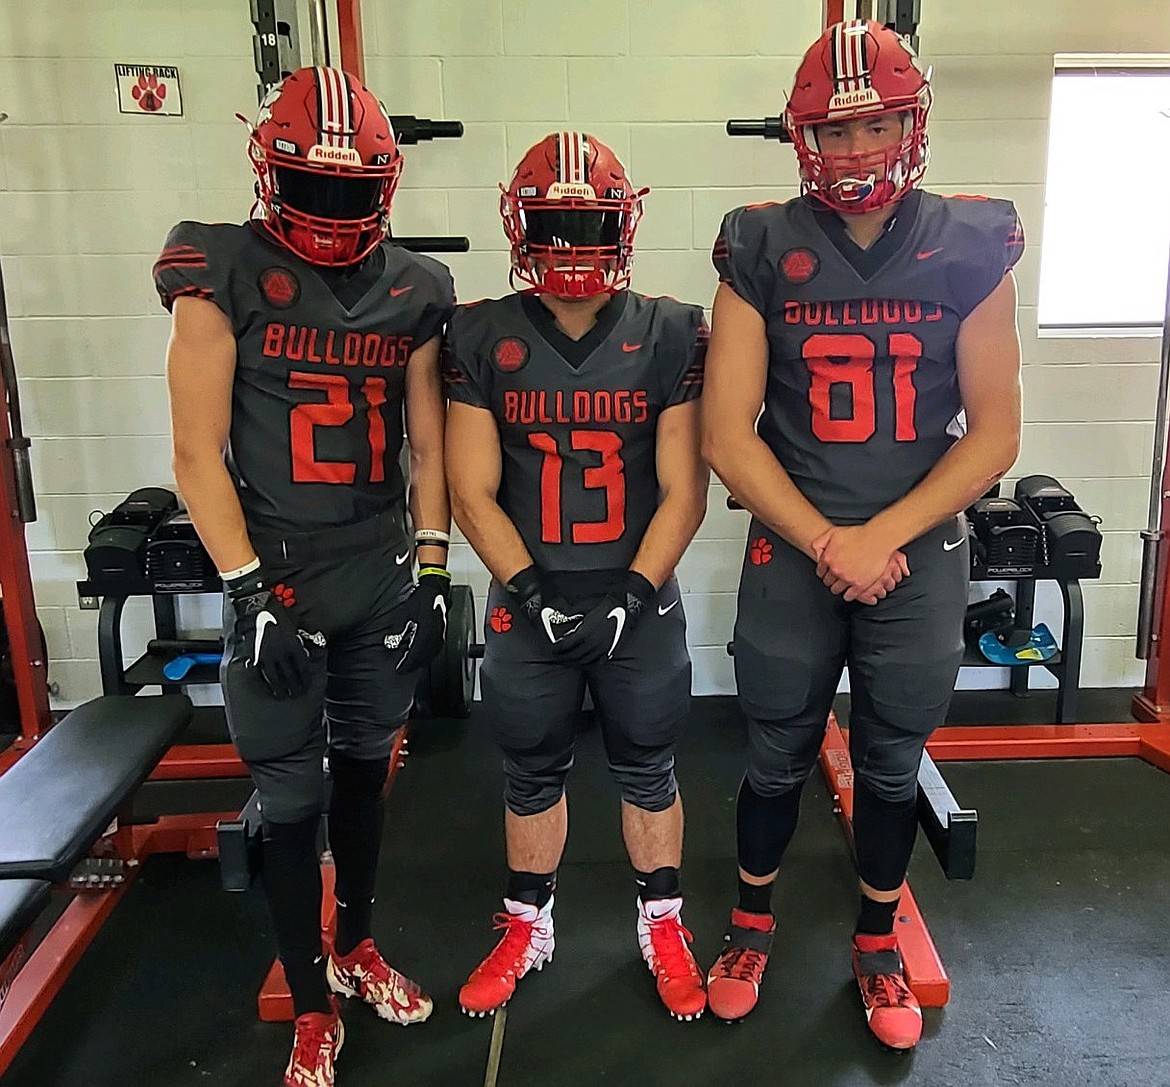 Players show off the new anthracite-colored alternate uniforms the football team will wear this fall to honor the history of the program.